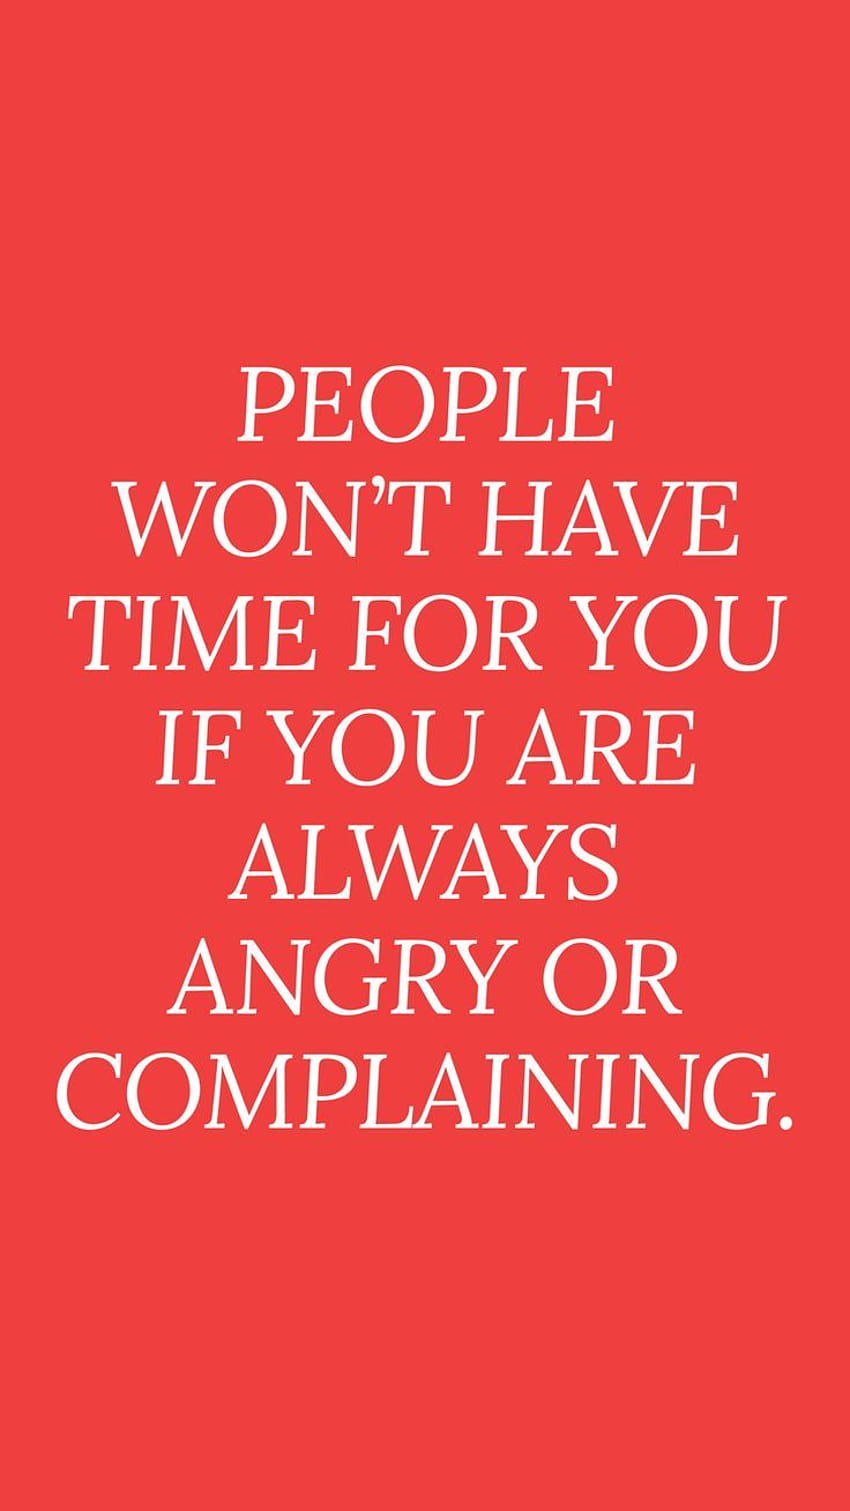 Quotes about anger, don&complain quotes, quit your crying, red ...